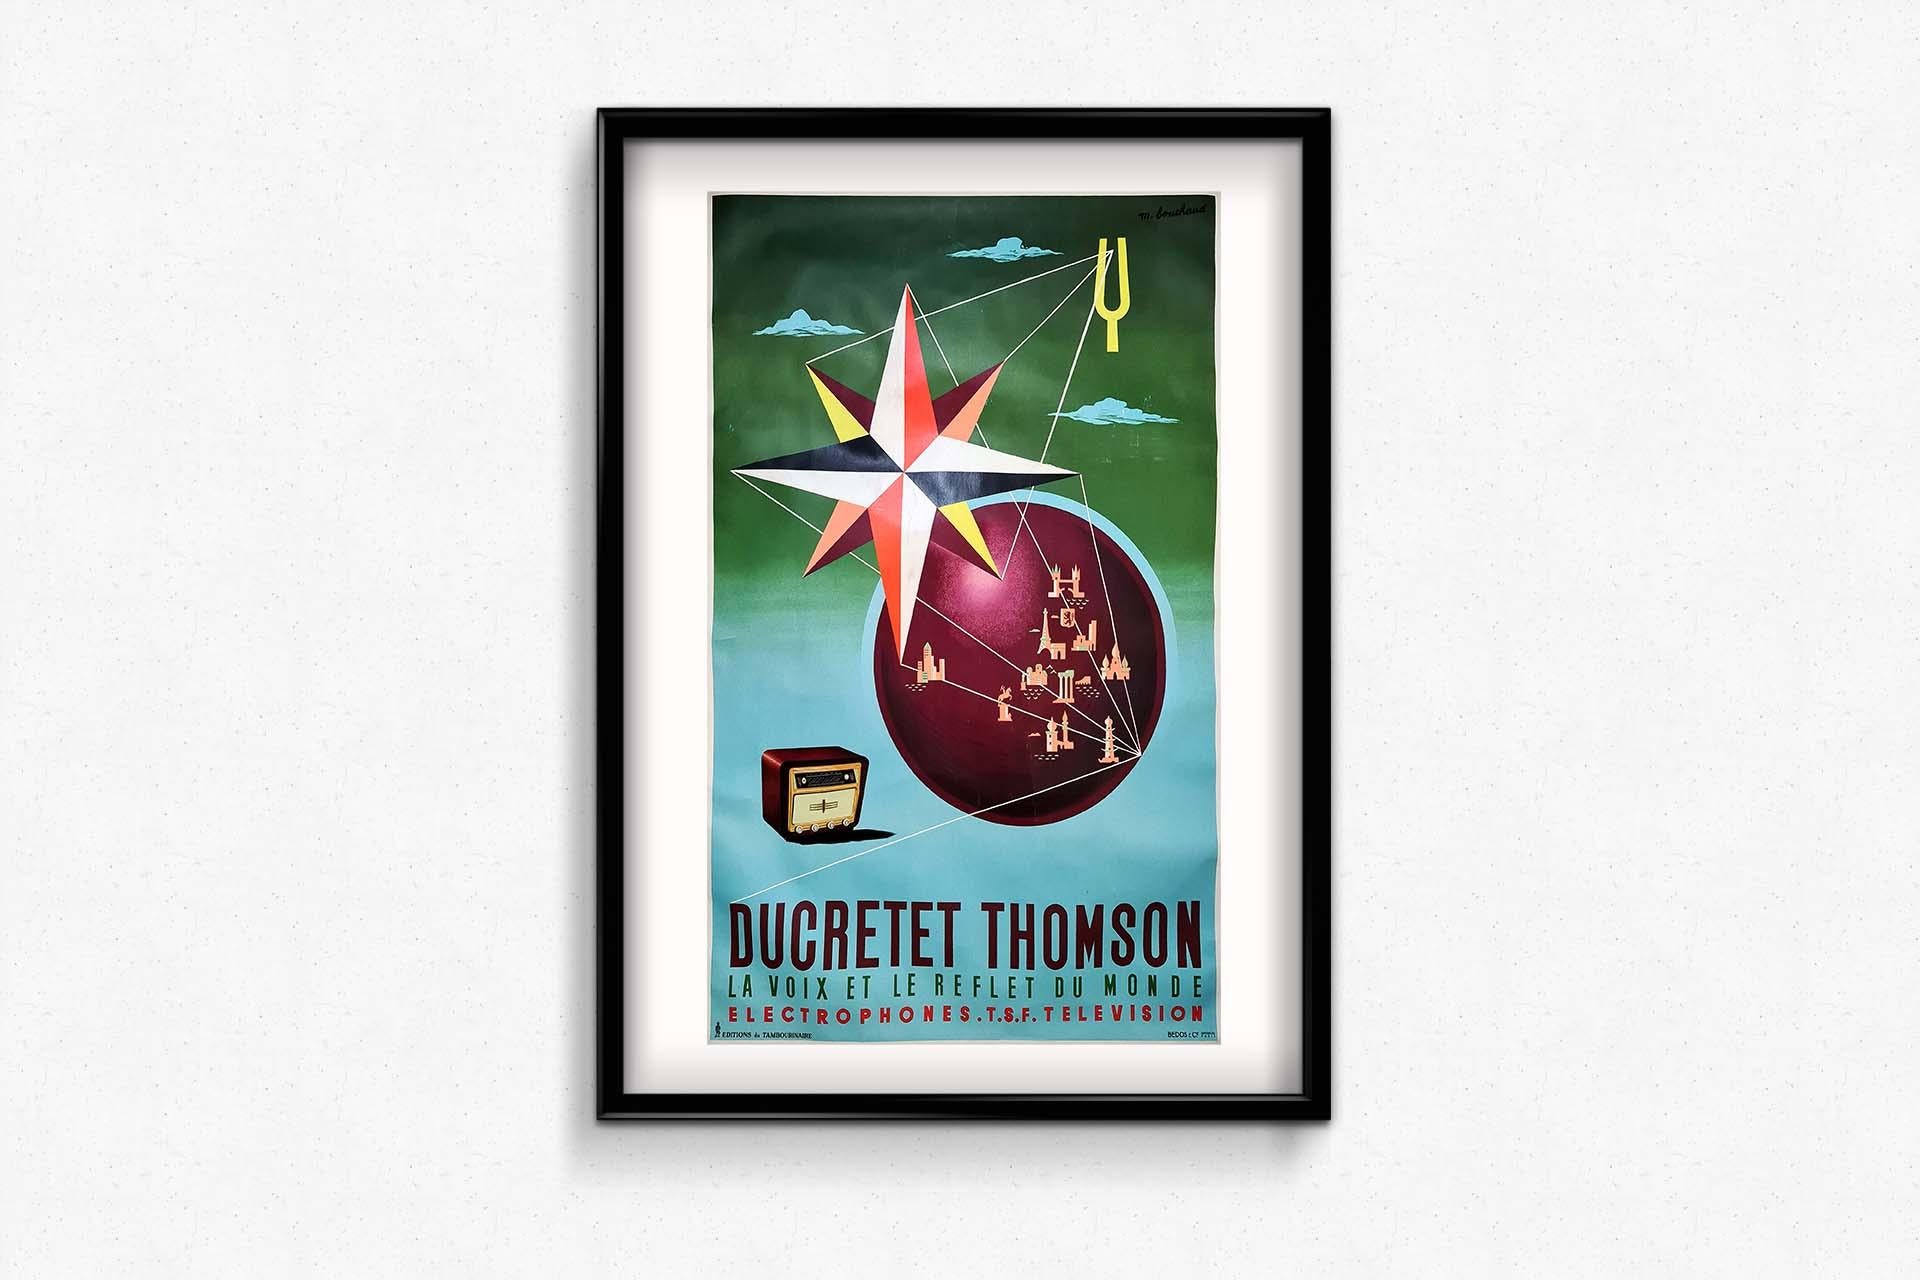 Original poster

Ducretet et Compagnie, now Ducretet Thomson, is an old French company founded in 1864 and whose brand disappeared at the end of the 1970s. It was founded by the scientist Eugène Adrien Ducretet who produced, among other scientific